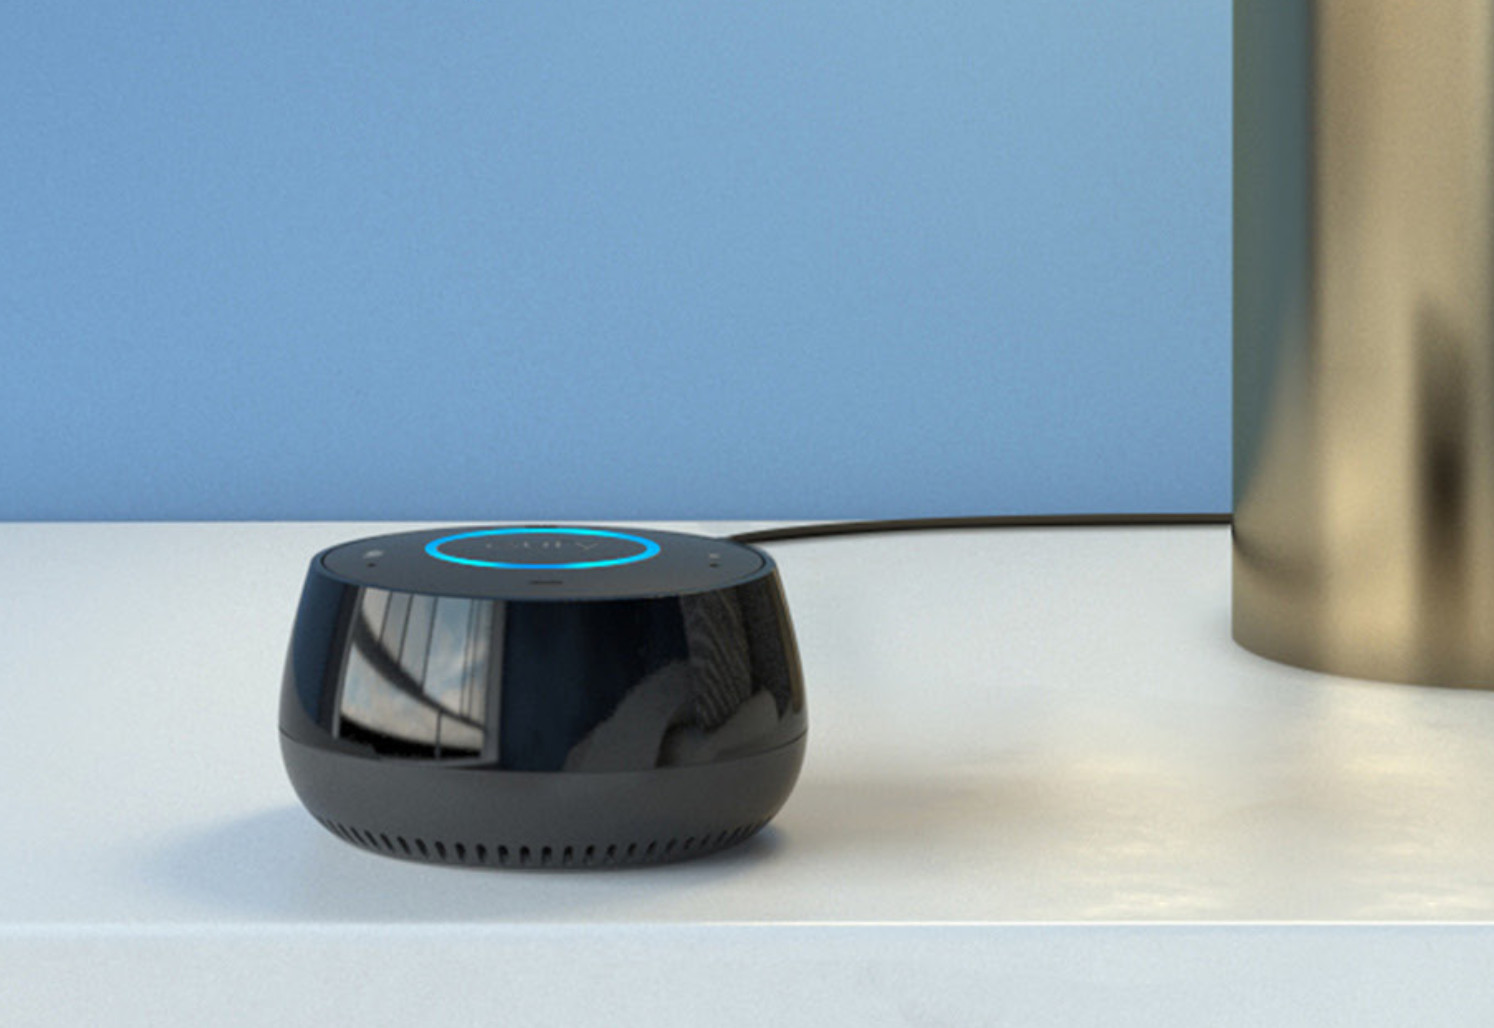 The Anker Eufy Genie is shown sitting atop a desk.